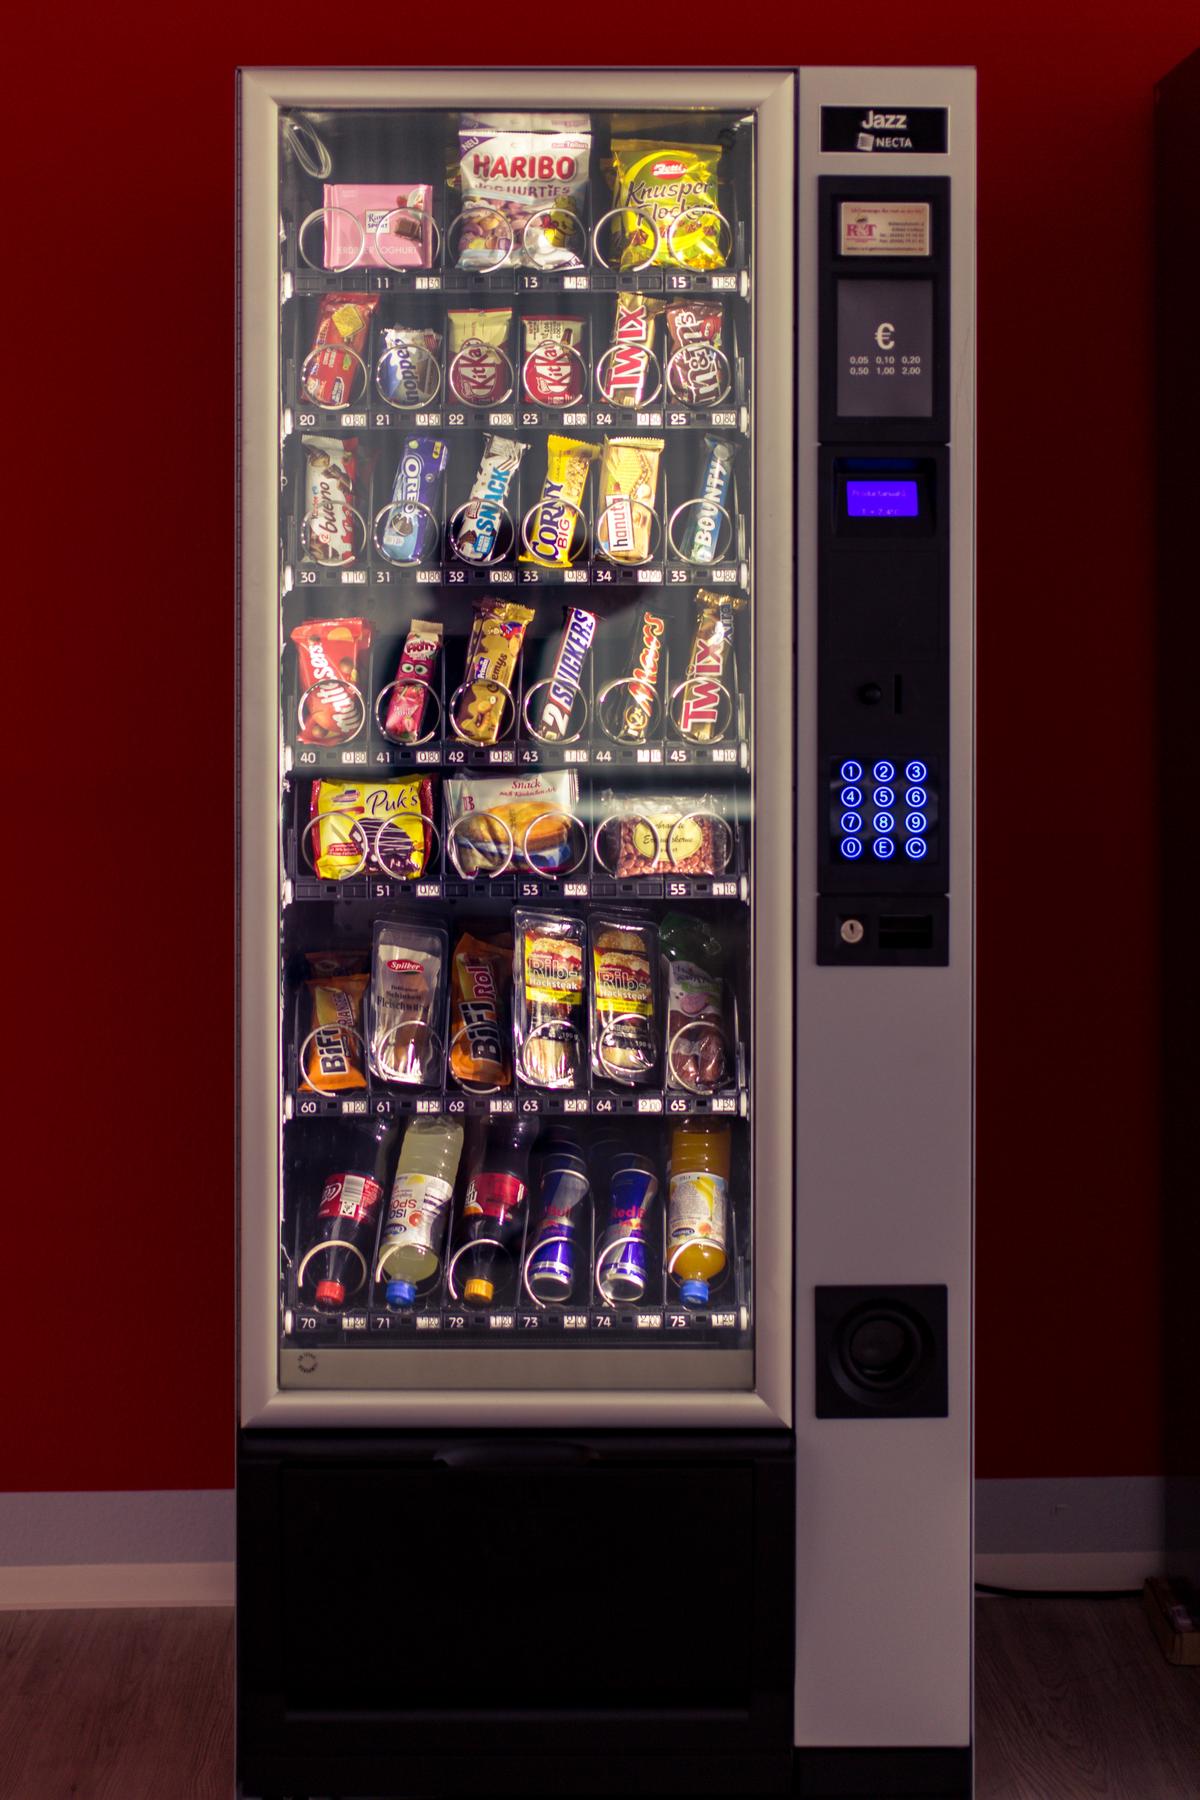 Image of a vending machine with various snacks and drinks, showcasing the convenience and variety of products available.